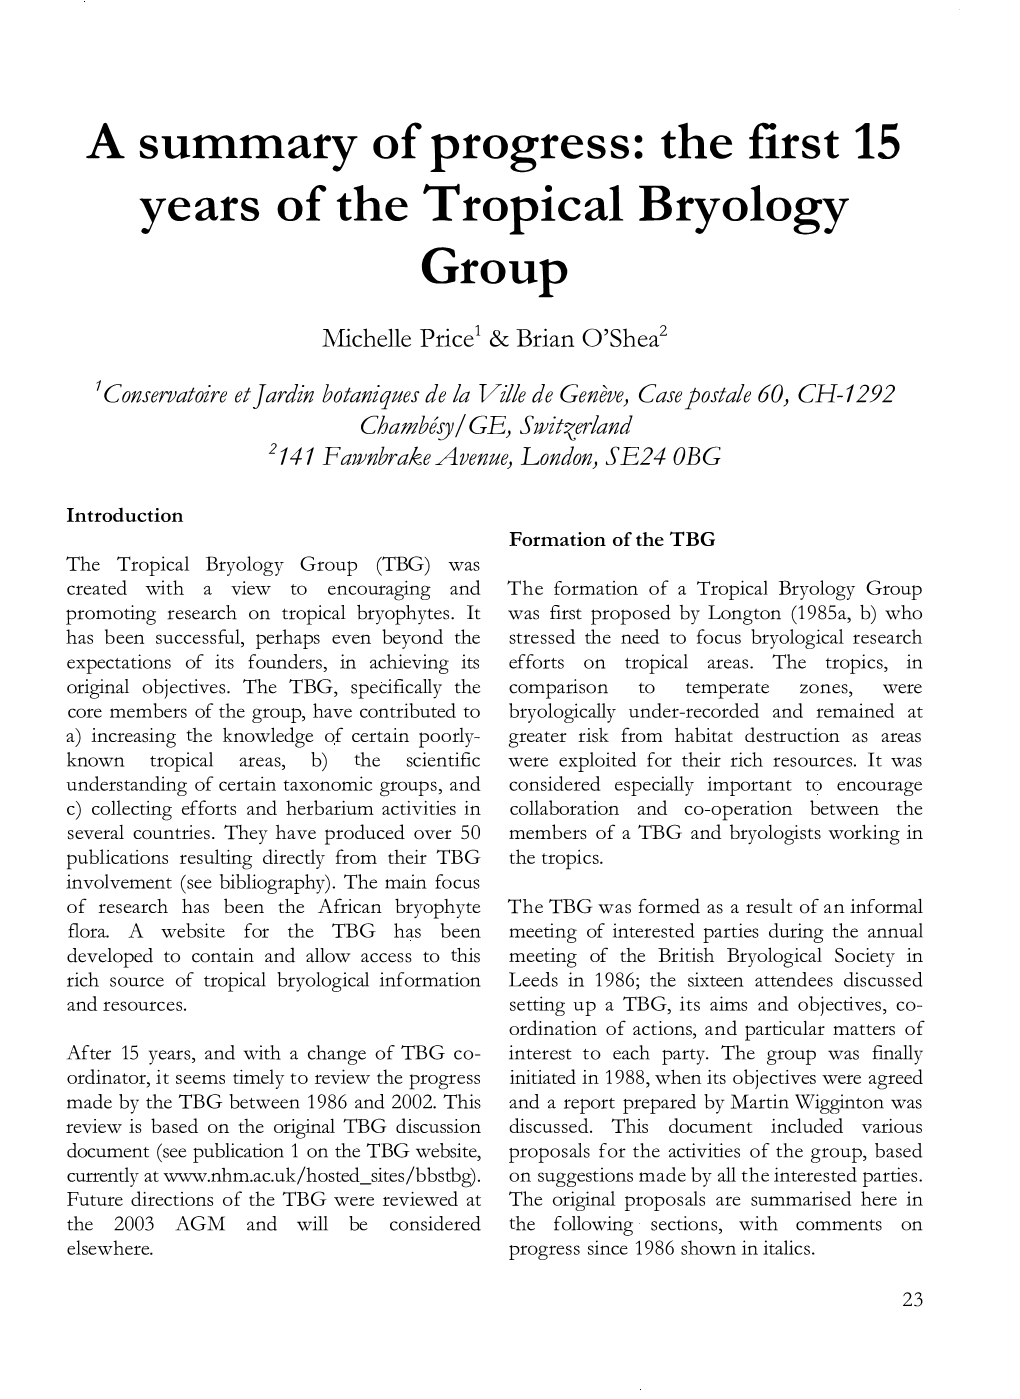 The First 15 Years of the Tropical Bryology Group